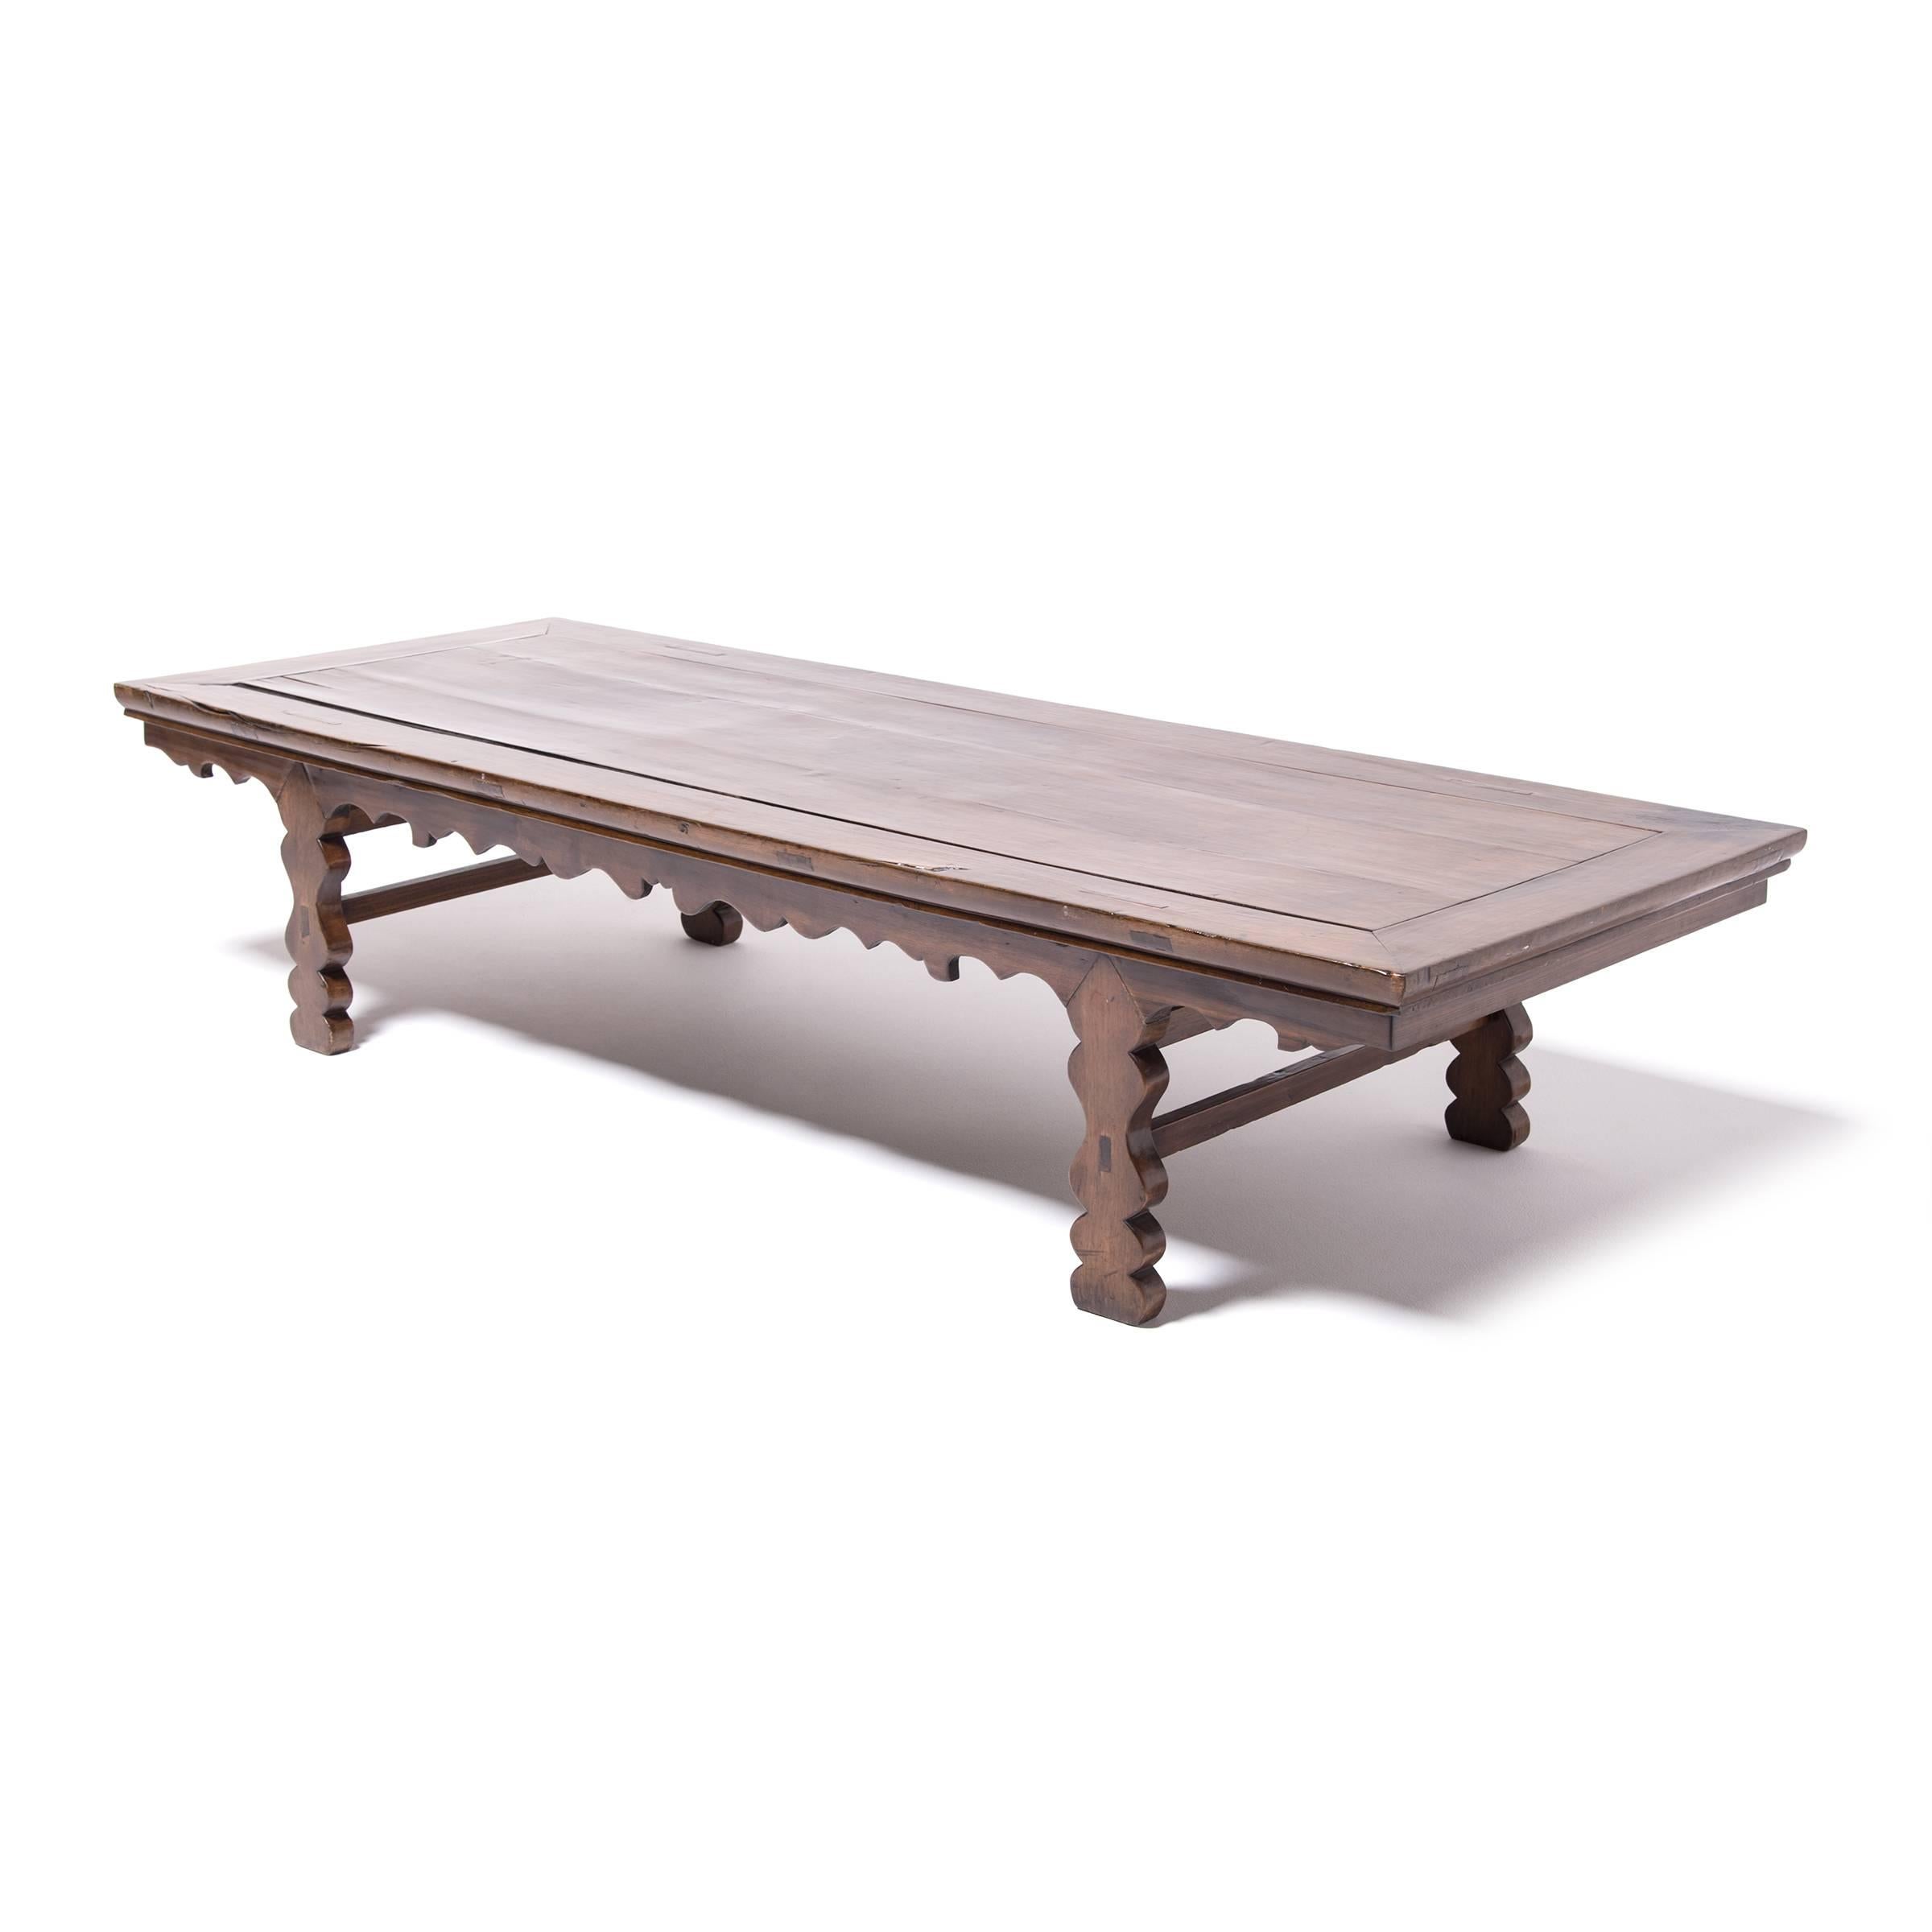 Made of warm toned walnut, this 19th century low table streamlines the meandering vine motif seen in traditional Chinese scrollwork in a dramatically curved apron and legs. Its low profile calls attention to the floating panel top. Appearing in many